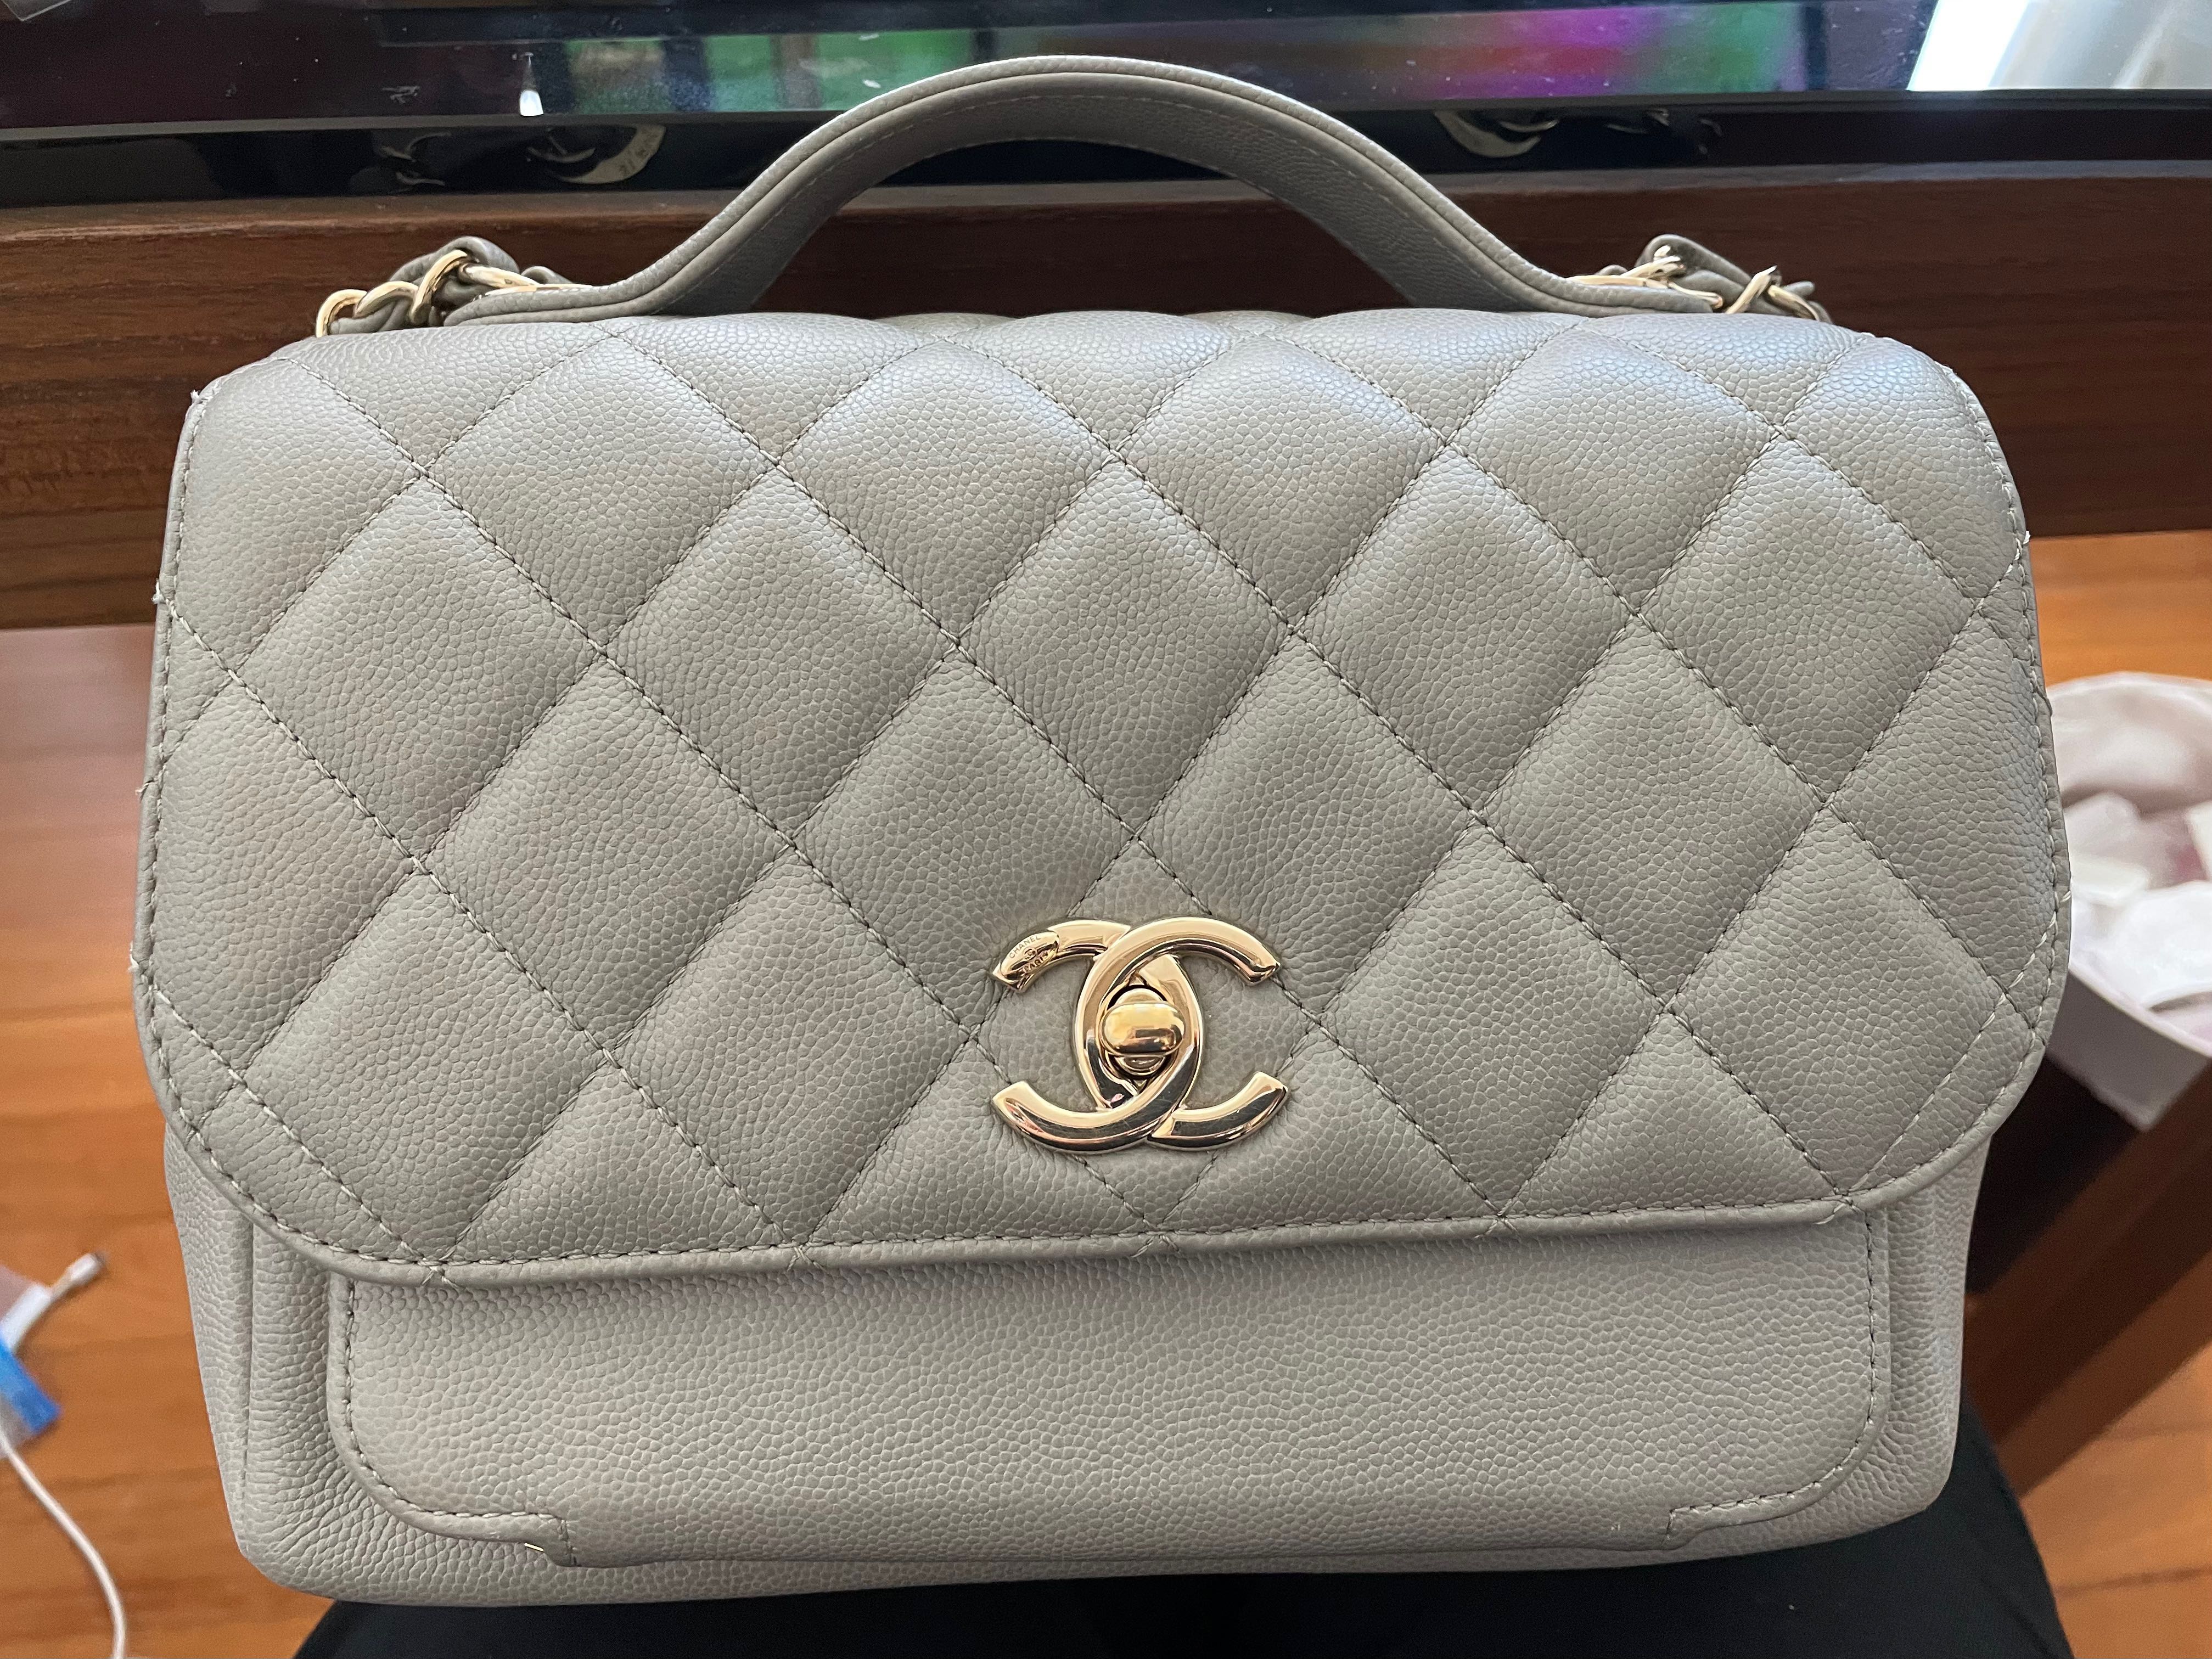 Bag Mad Boutique - New Chanel LGHW Dove Grey Caviar Small Business Affinity,  PM for more pics or info, £2740⭐️ Available to purchase below